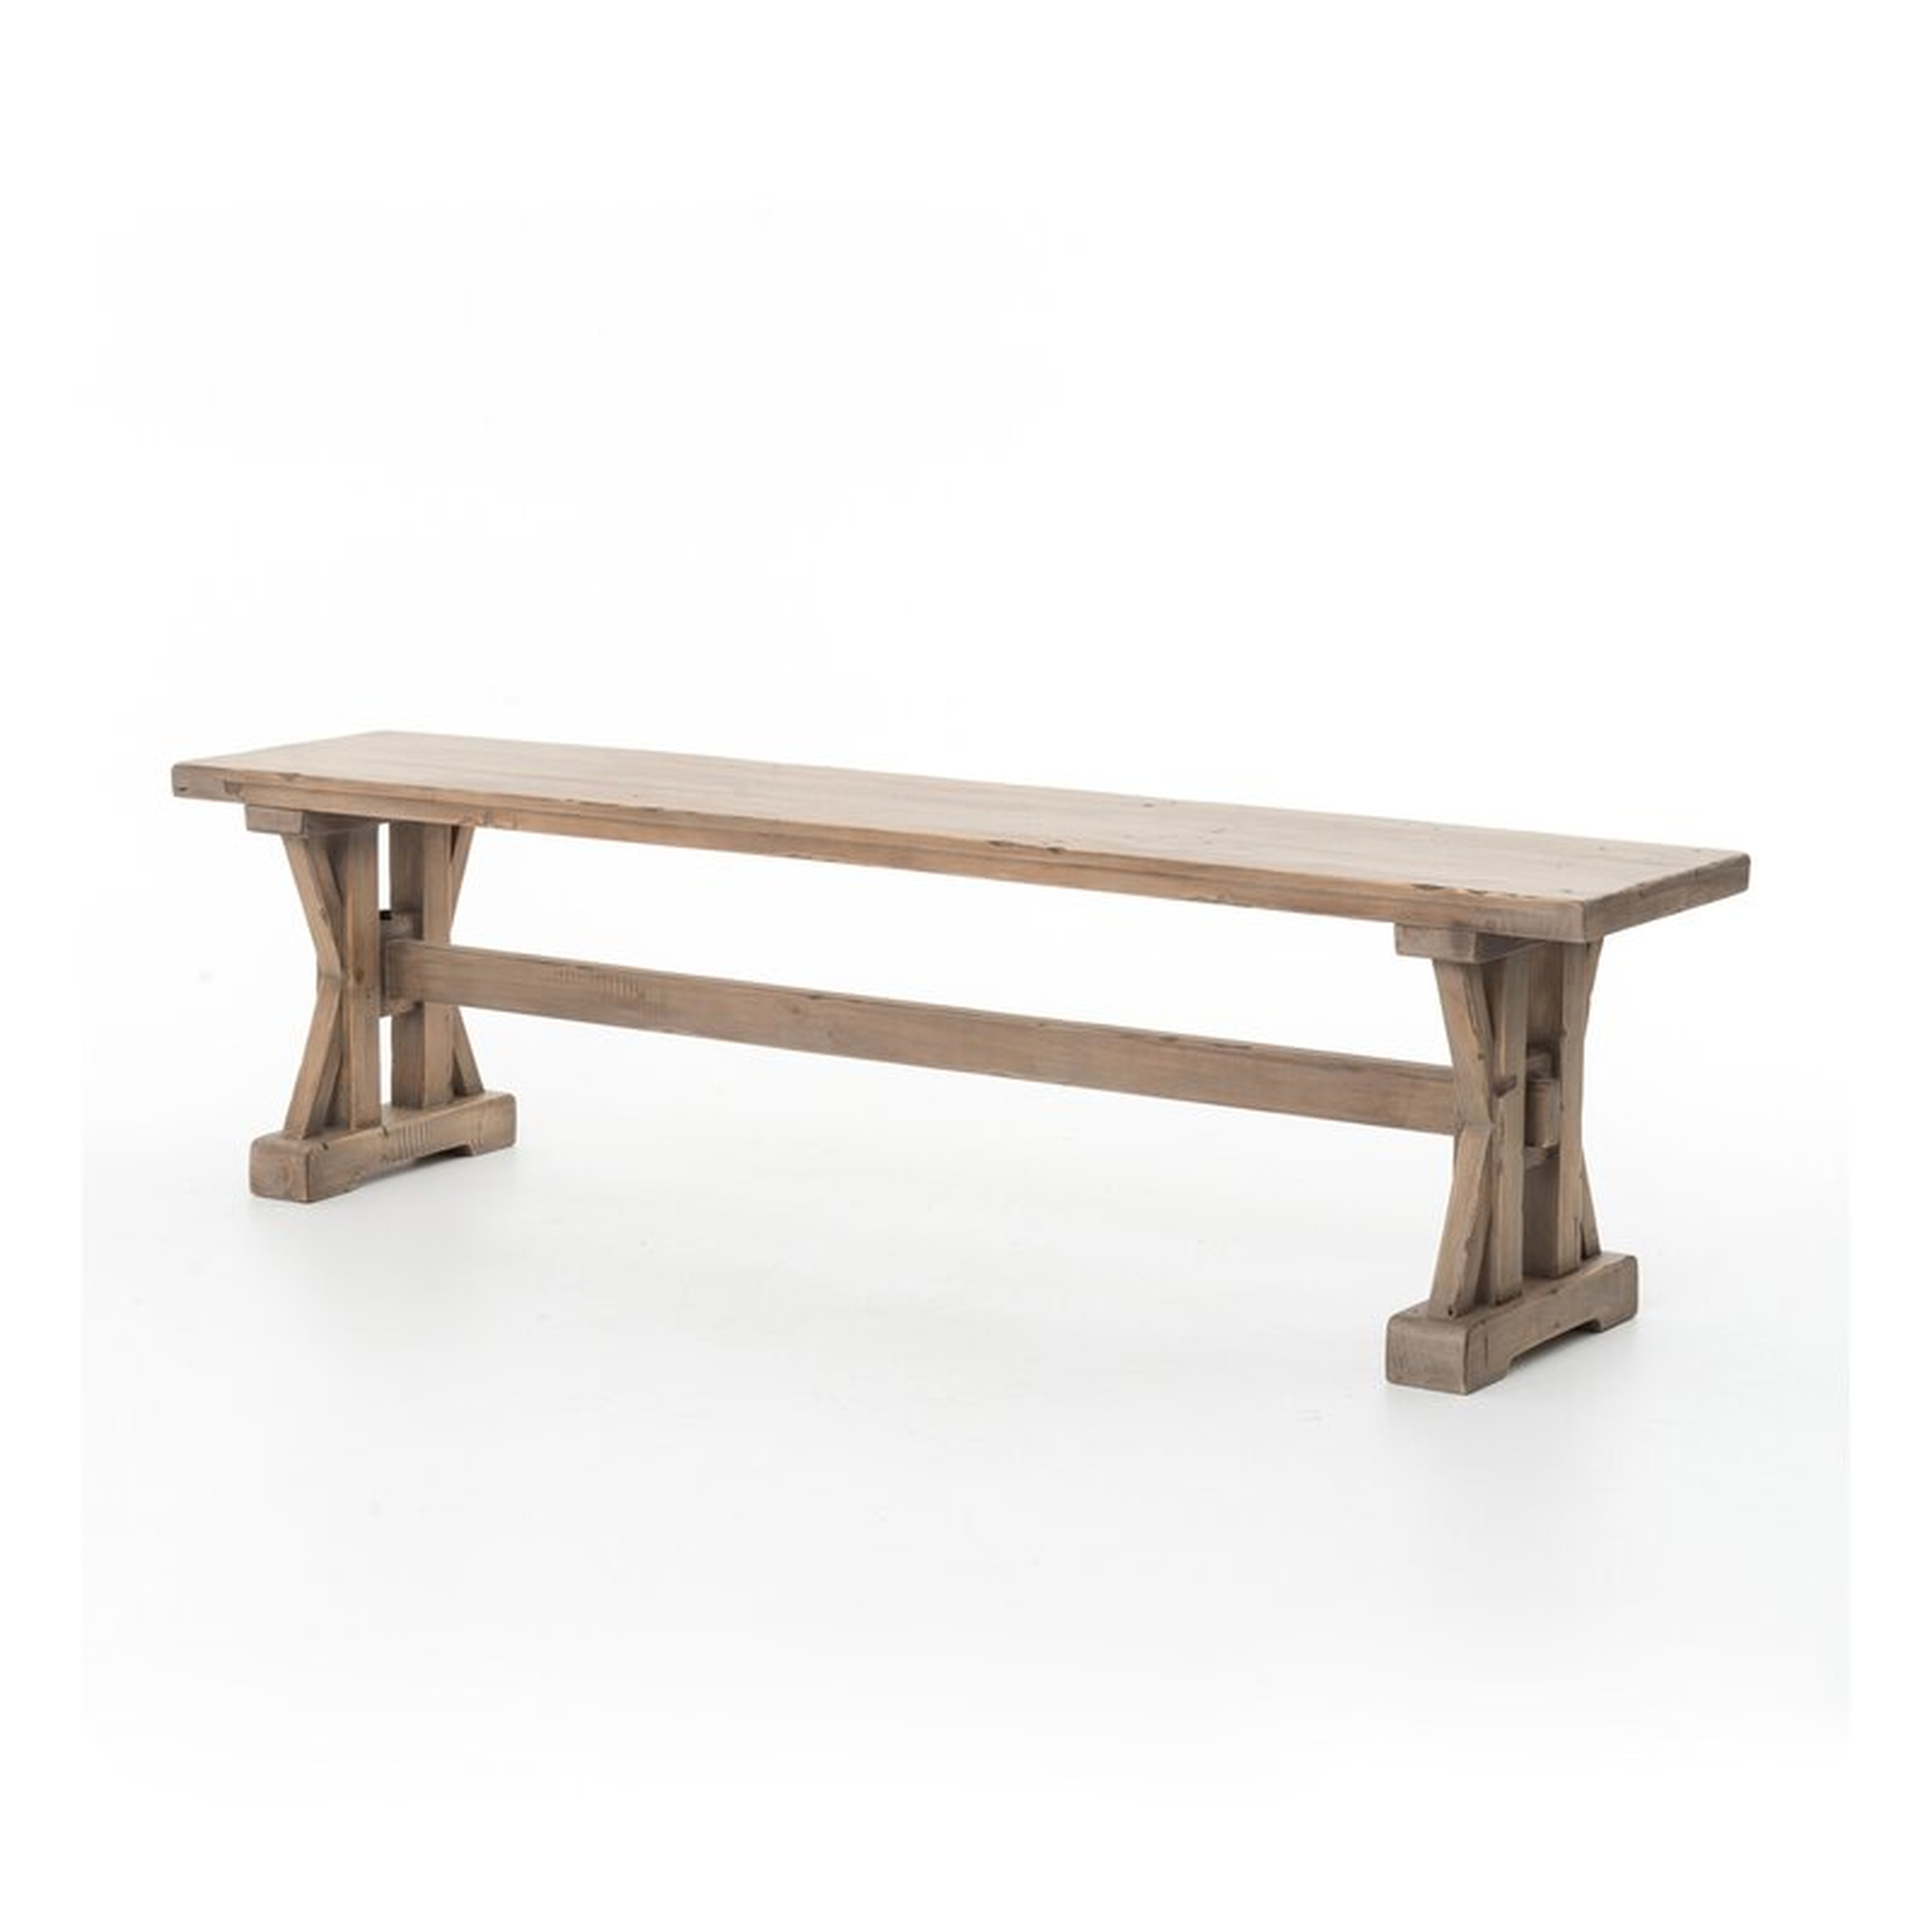 Four Hands Tuscan Spring Wood Bench - Perigold